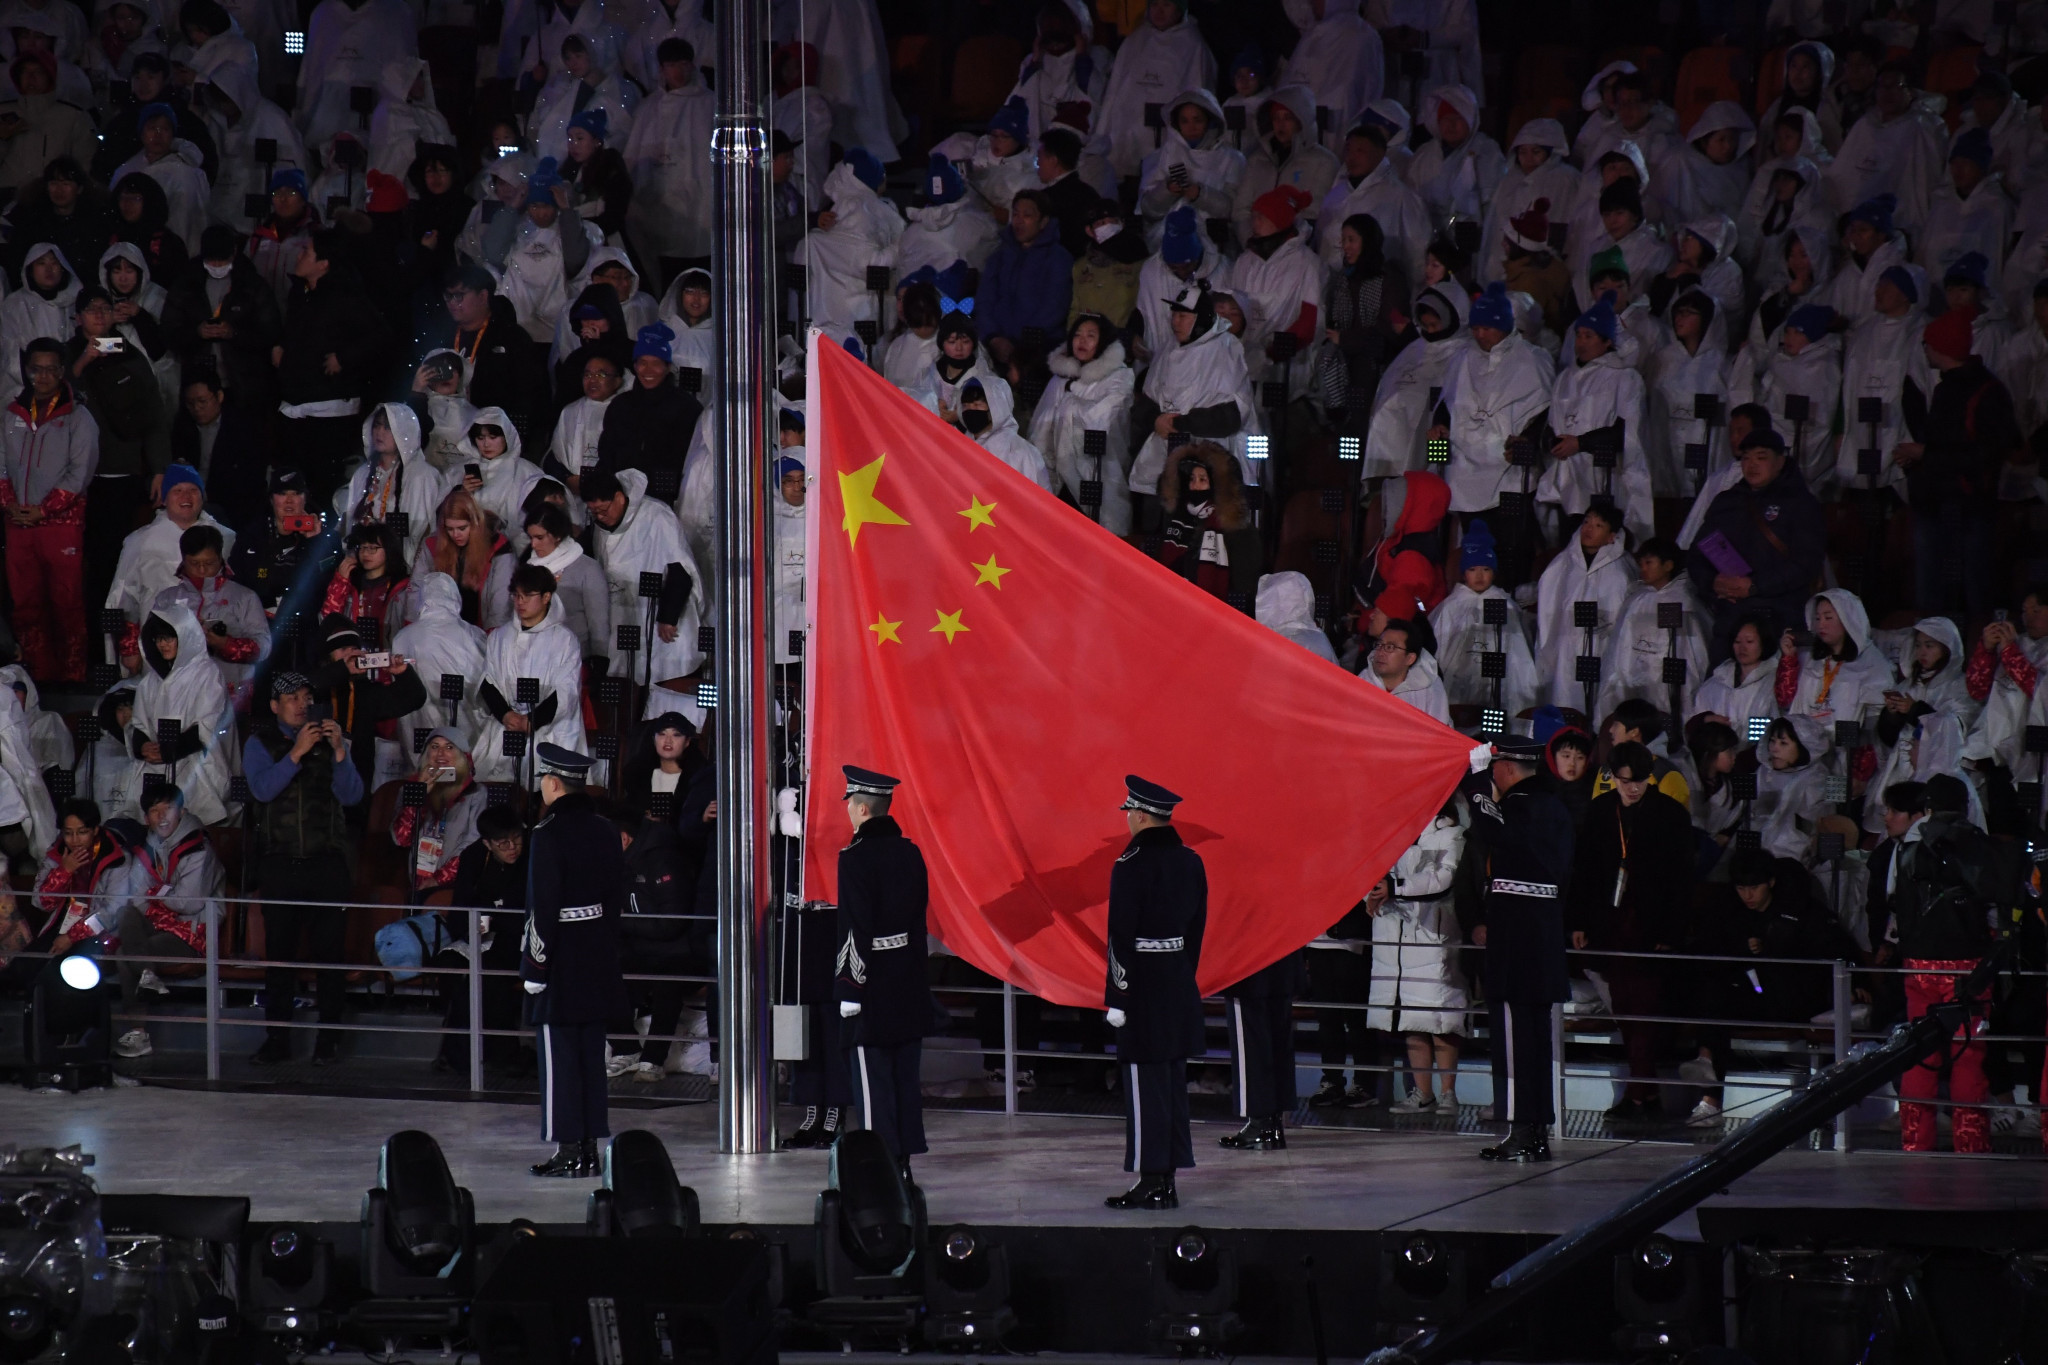 The Chinese flag was then hoisted ©Getty Images